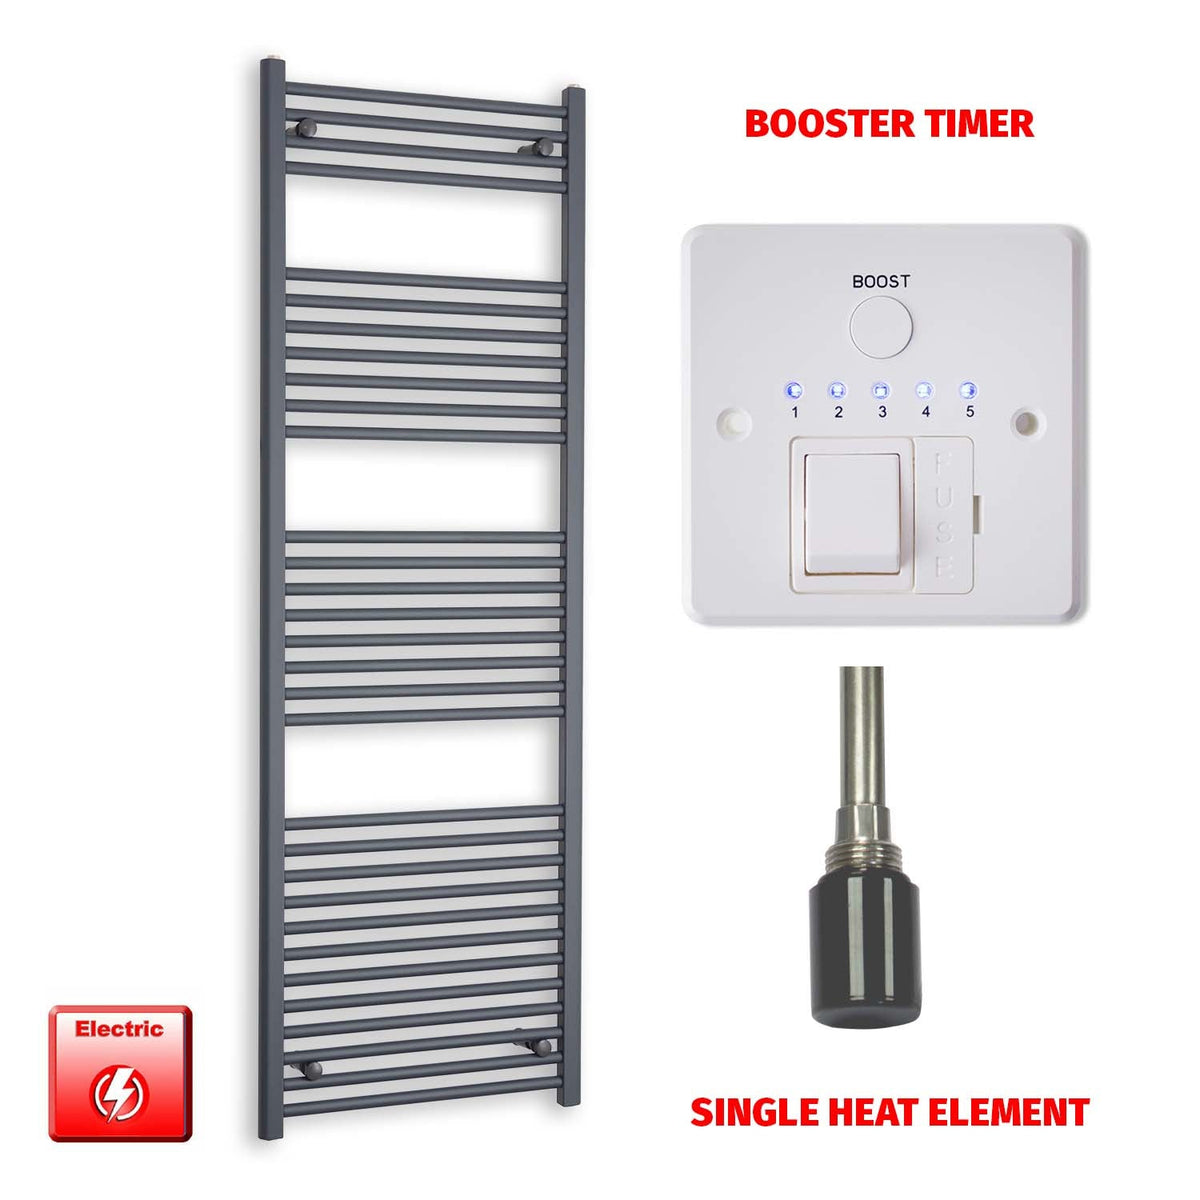 1800mm High 600mm Wide Flat Anthracite Pre-Filled Electric Heated Towel Rail Radiator HTR Single heat element Booster timer